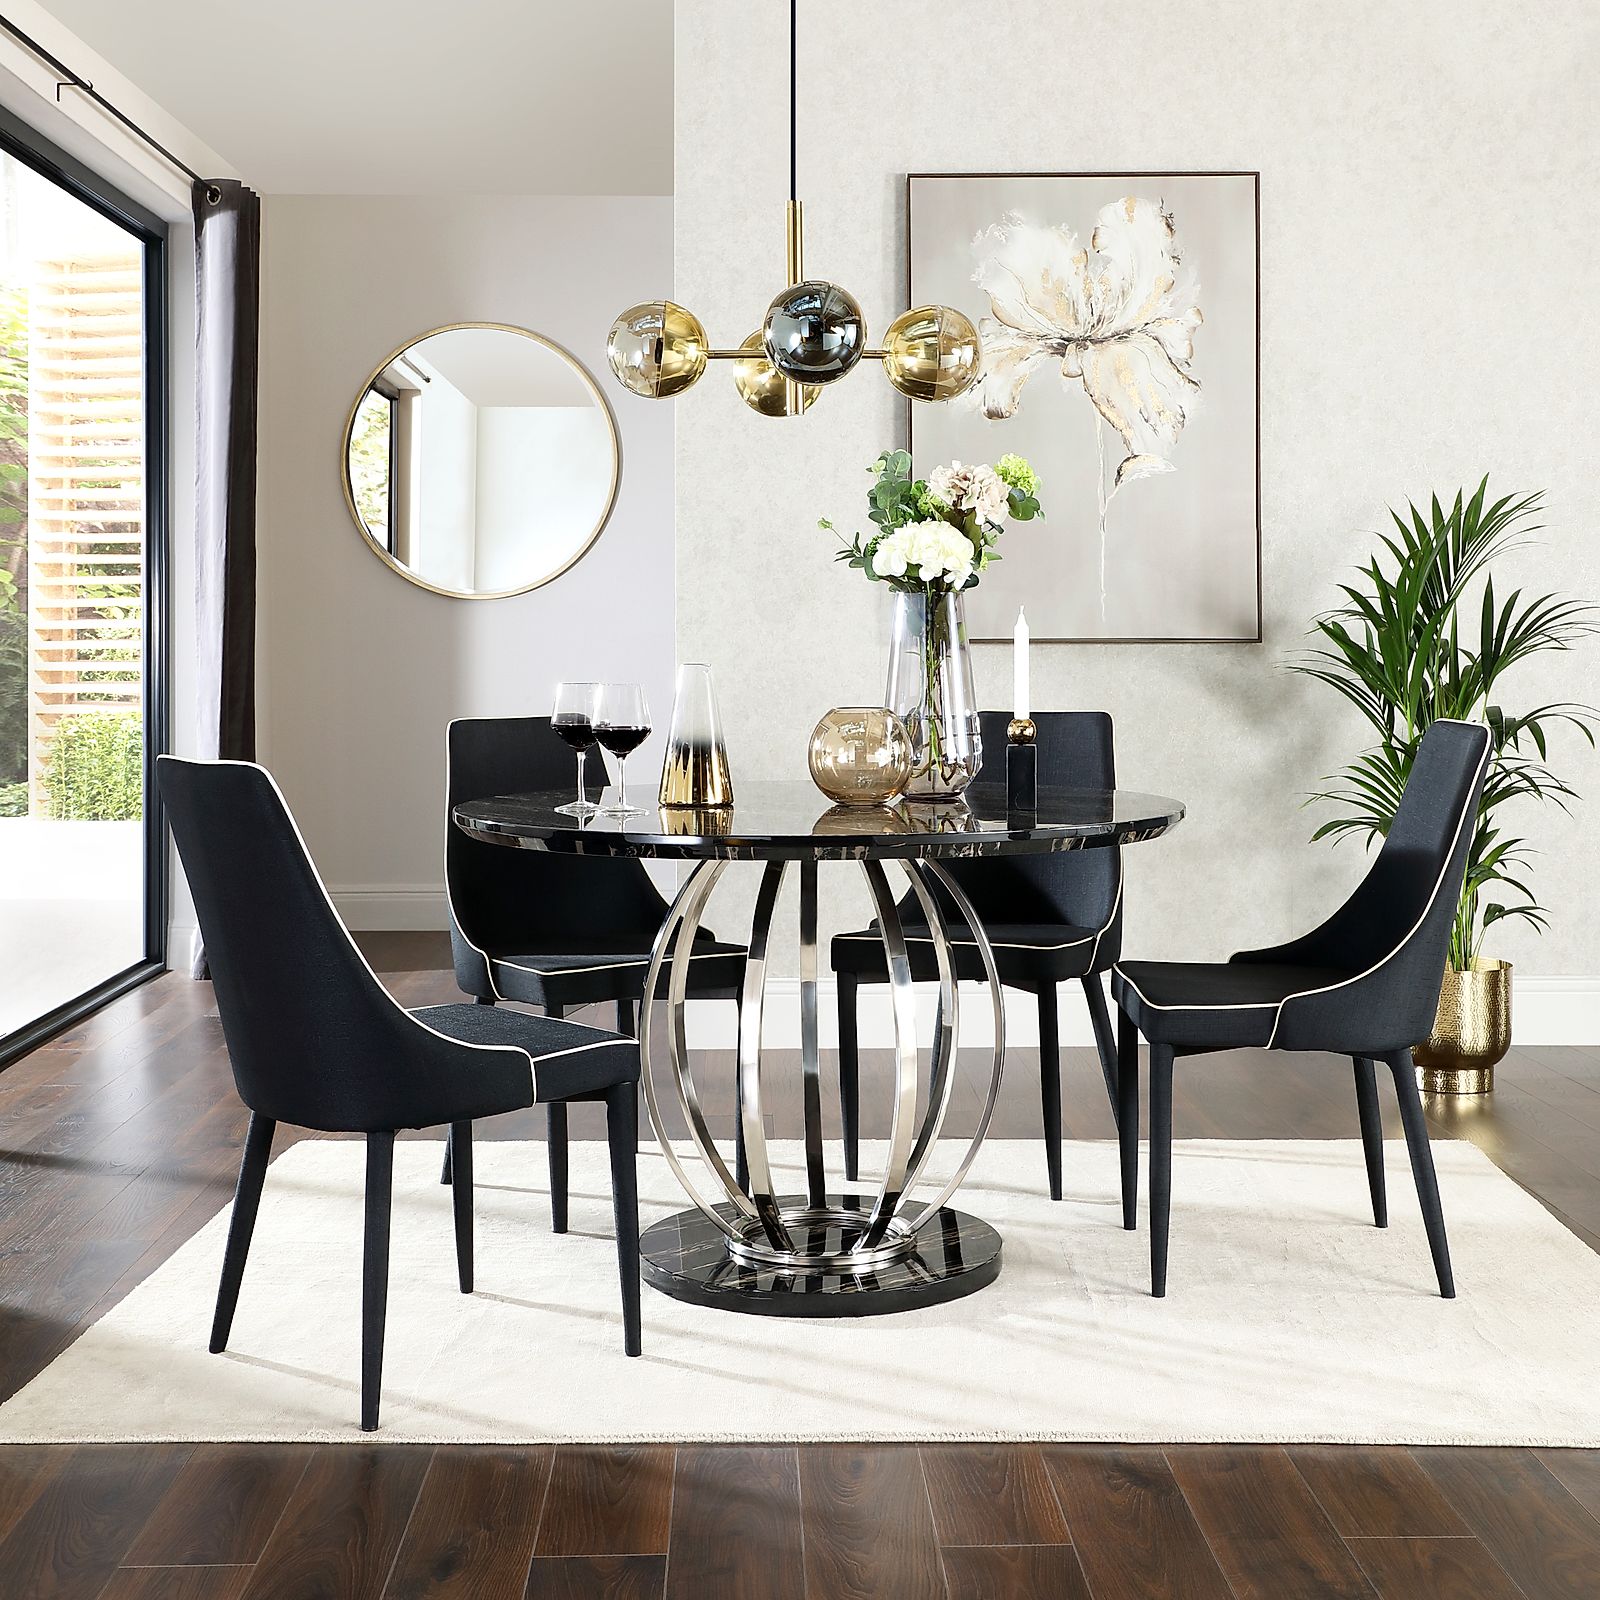 Savoy Round Black Marble and Chrome Dining Table with 4 Modena Black